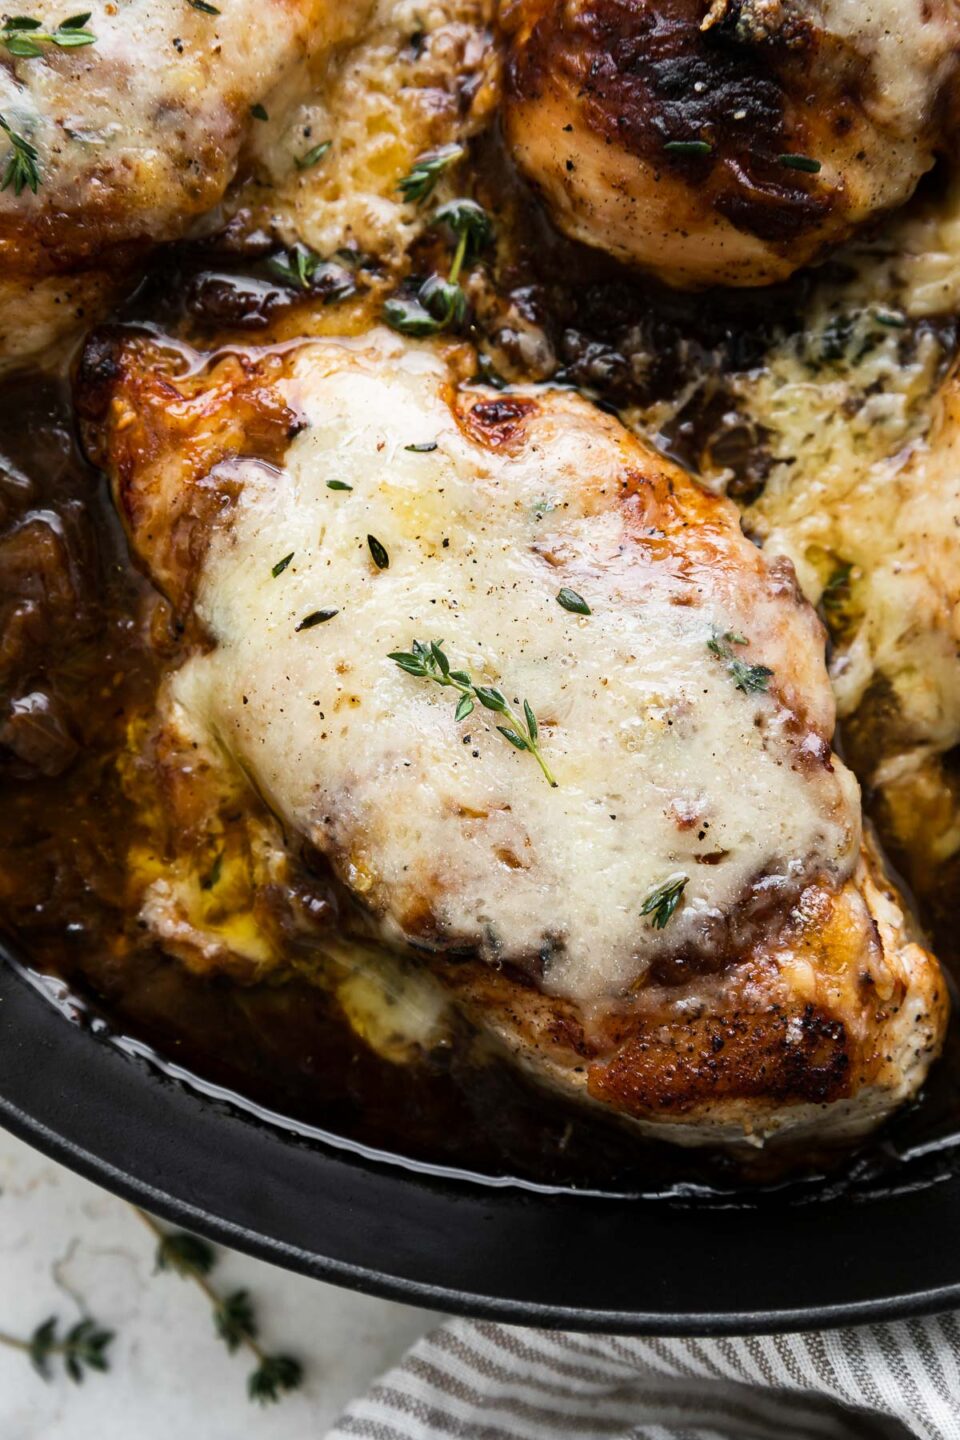 A close up of finished French onion chicken inside of a grey Staub cast iron skillet. The skillet sits atop a creamy white textured surface and has a grey and white striped linen napkin wrapped around the skillet handle. Fresh thyme leaves surround the skillet and the French onion chicken skillet has been garnished with fresh thyme.